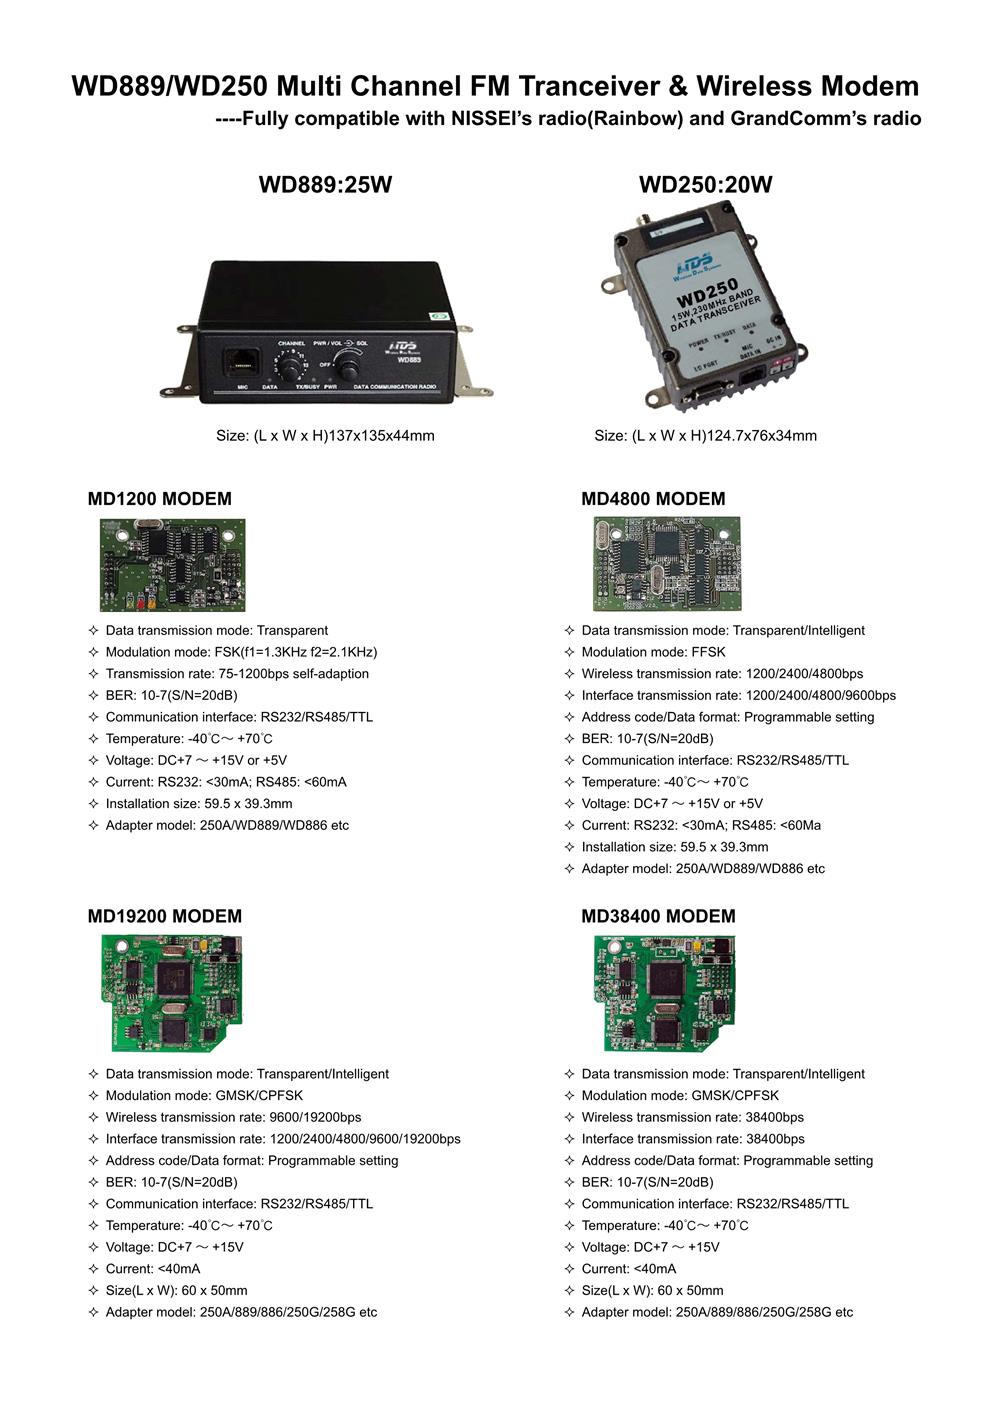 WD889/WD250 Multi-Channel FM Transceiver And Associated Wireless Modems(图1)